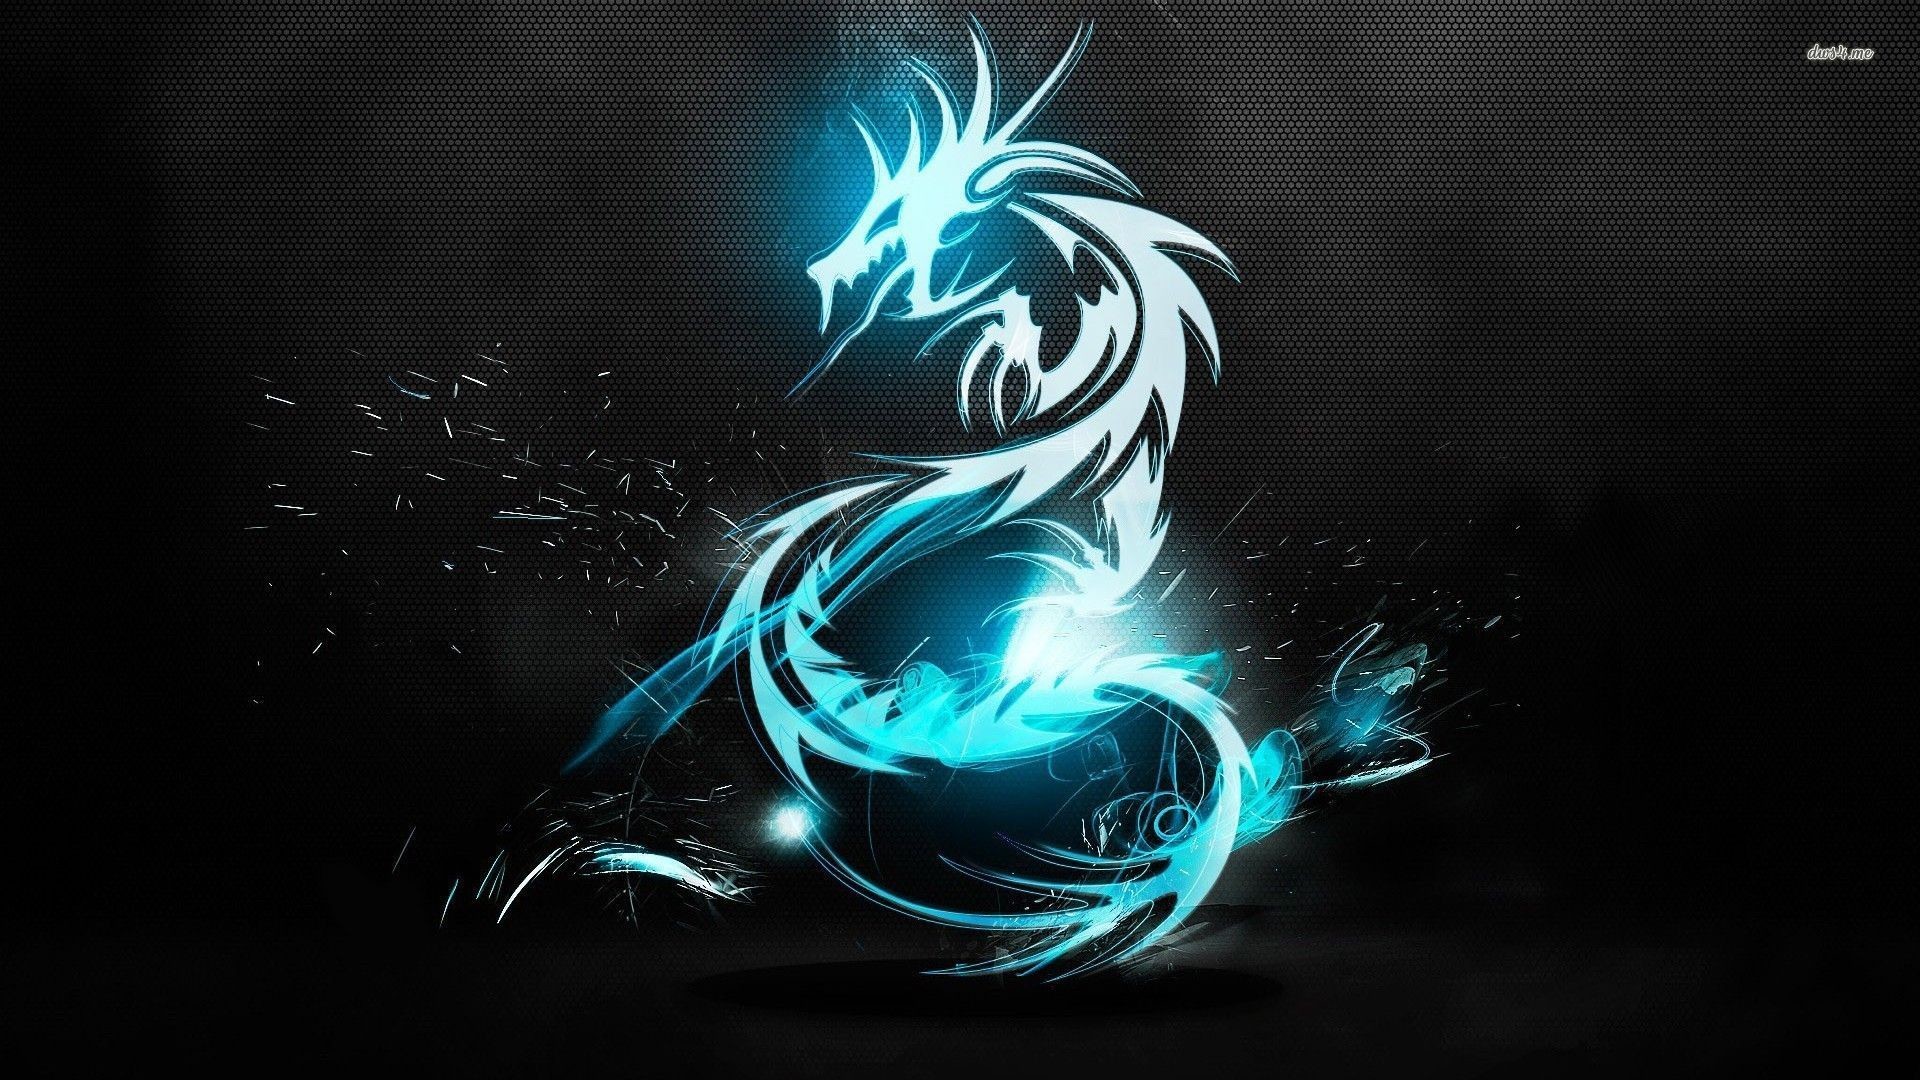 1920x1080 Top Tribal Dragon Wallpapers Hd Images for Pinterest